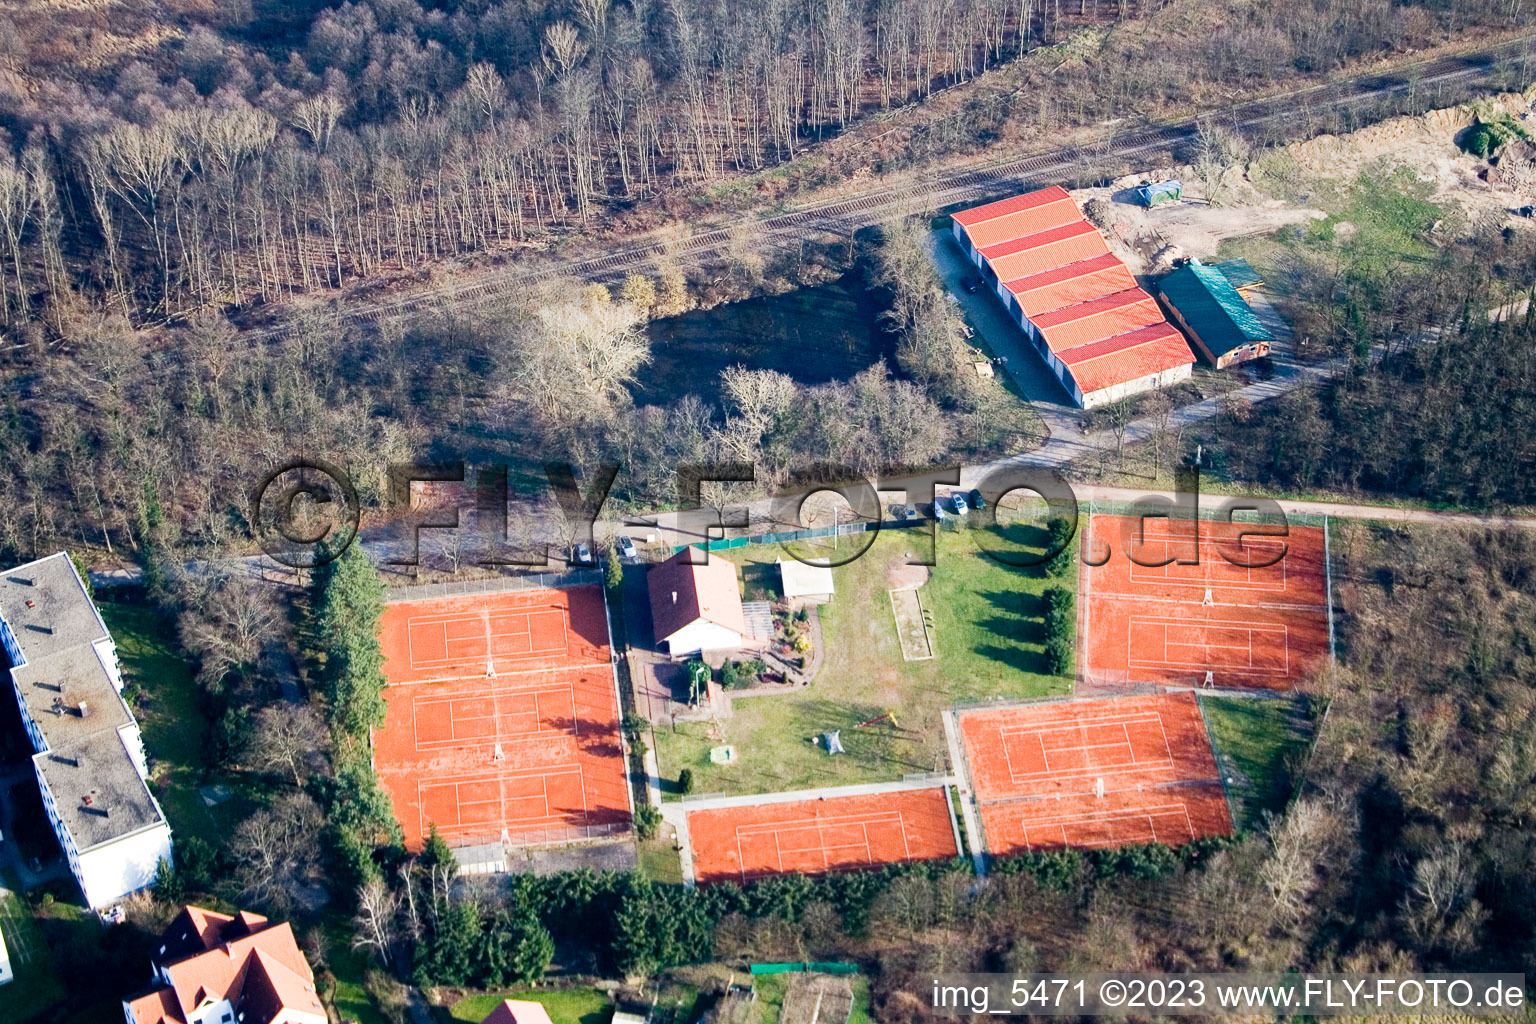 Tennis club in Jockgrim in the state Rhineland-Palatinate, Germany from above